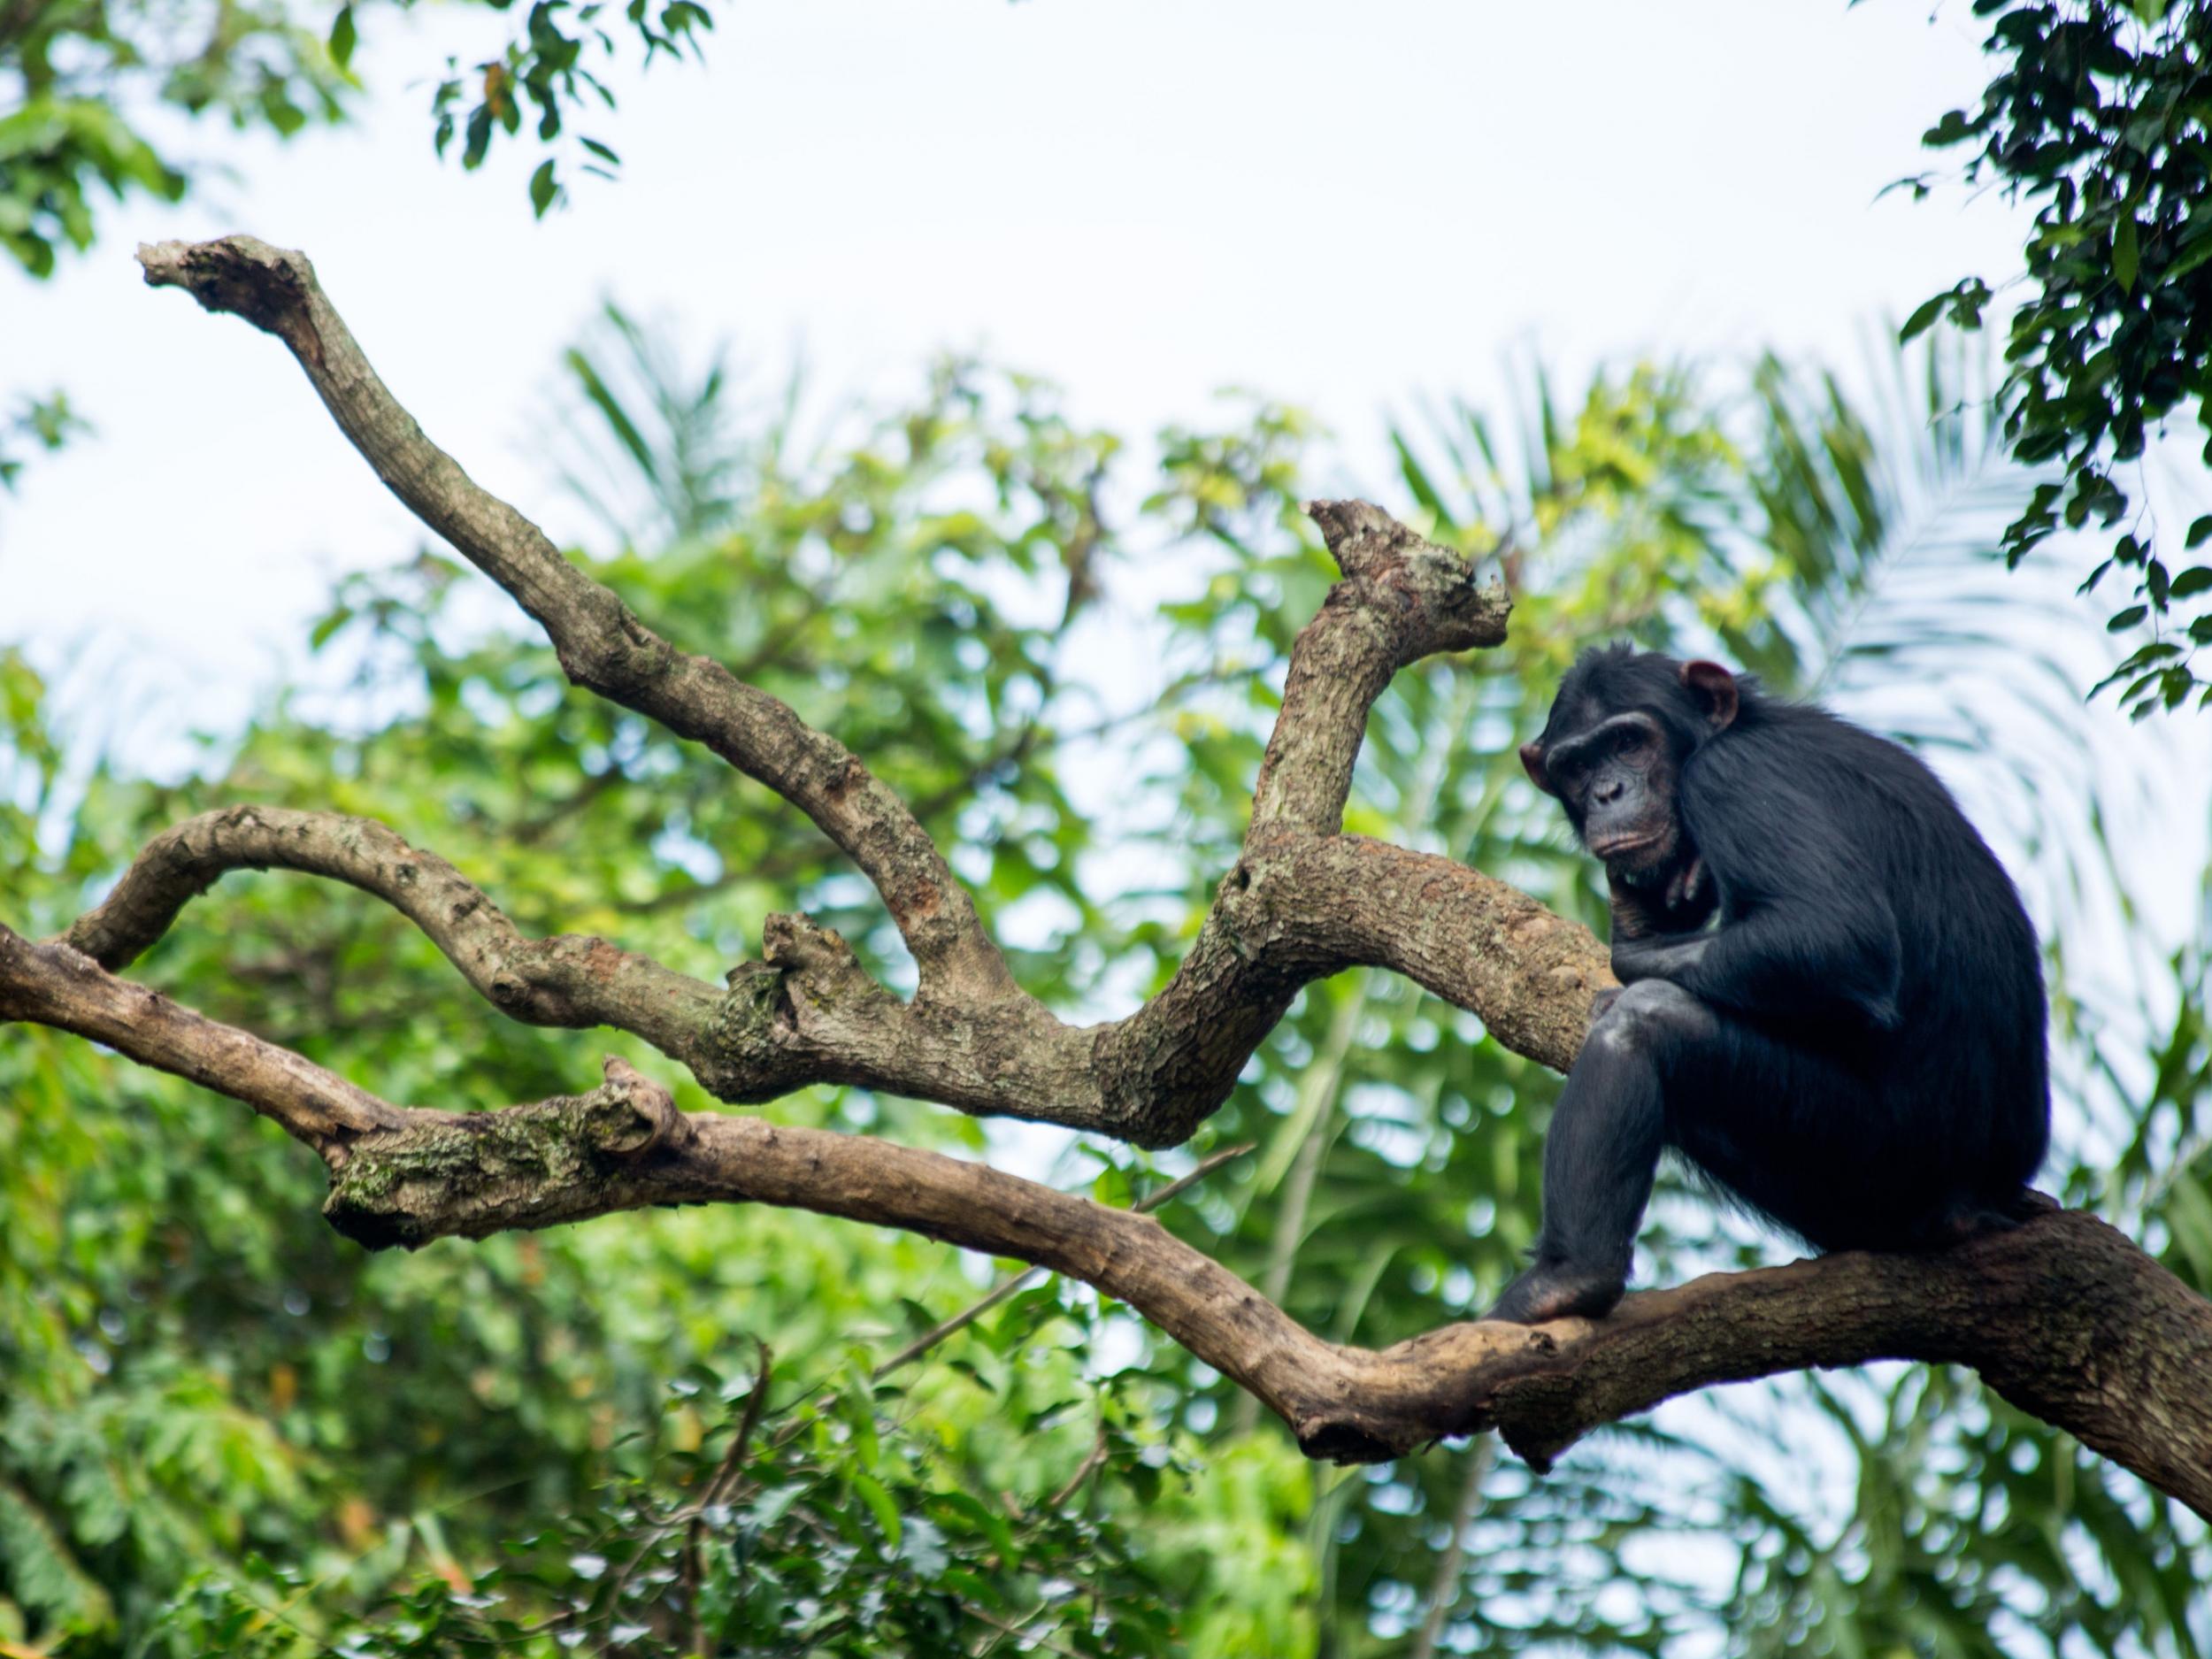 Chimpanzees are among the primate species threatened globally by human activities such as habitat destruction and hunting